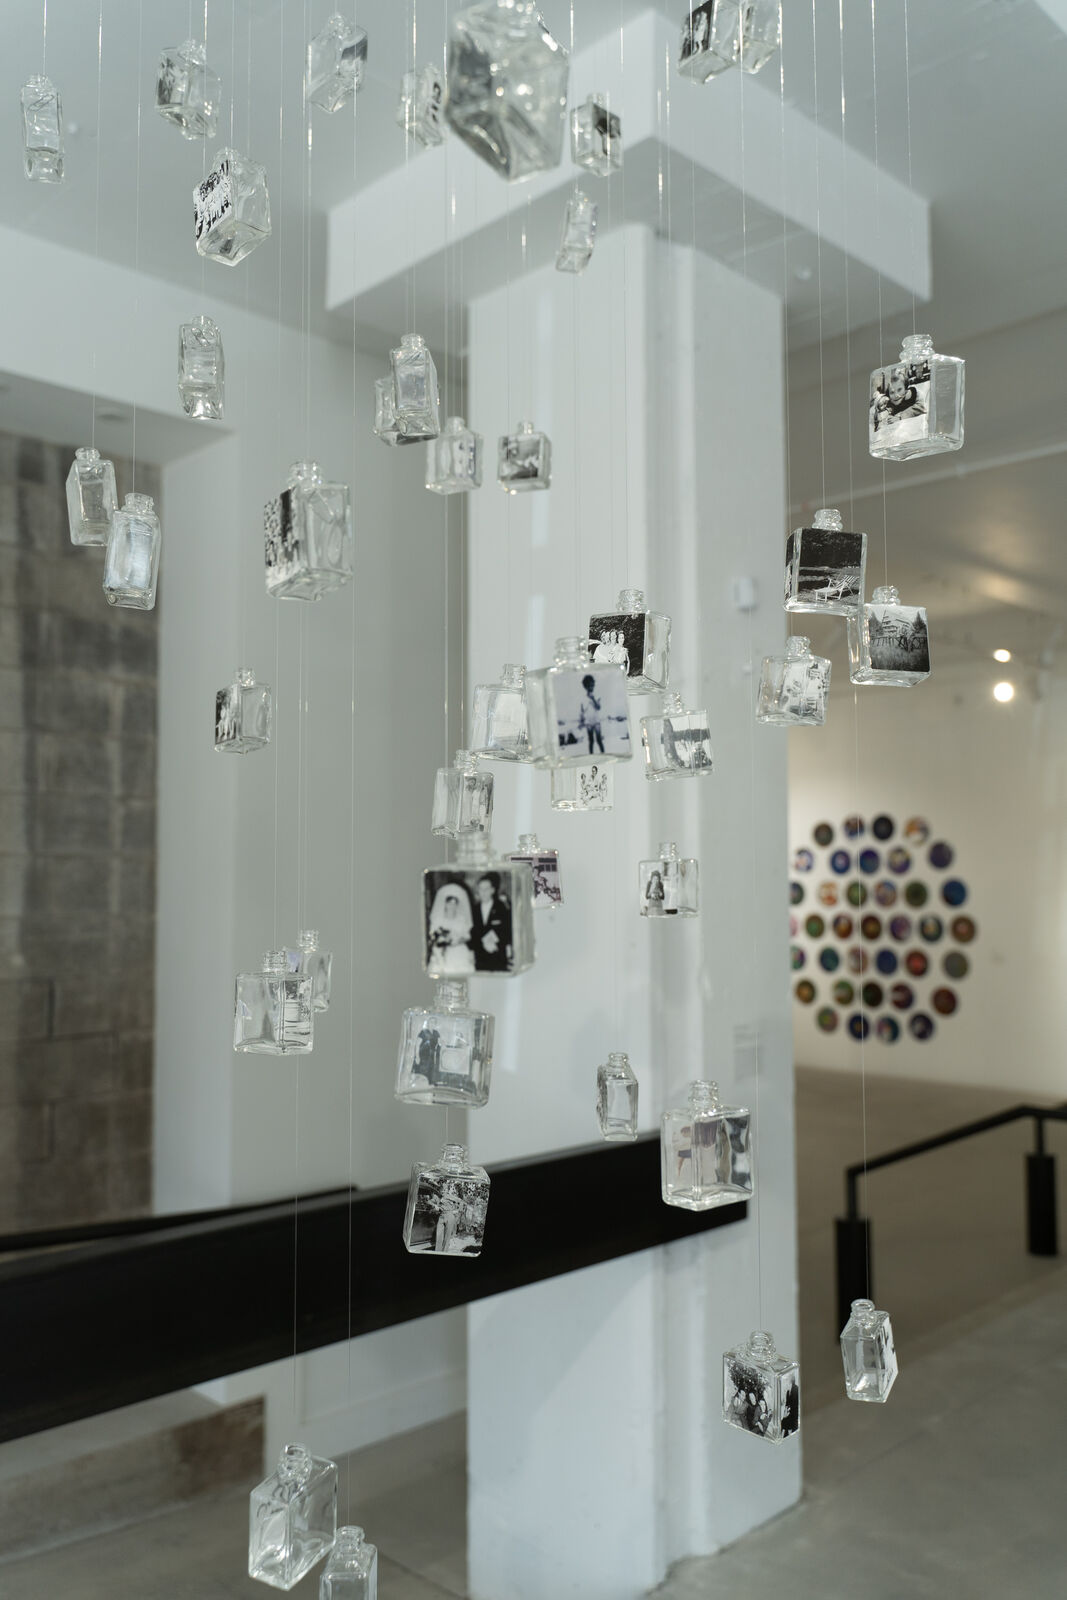 glass bottles with black and white pictues create a textured mobile that hangs from a gallery ceiling